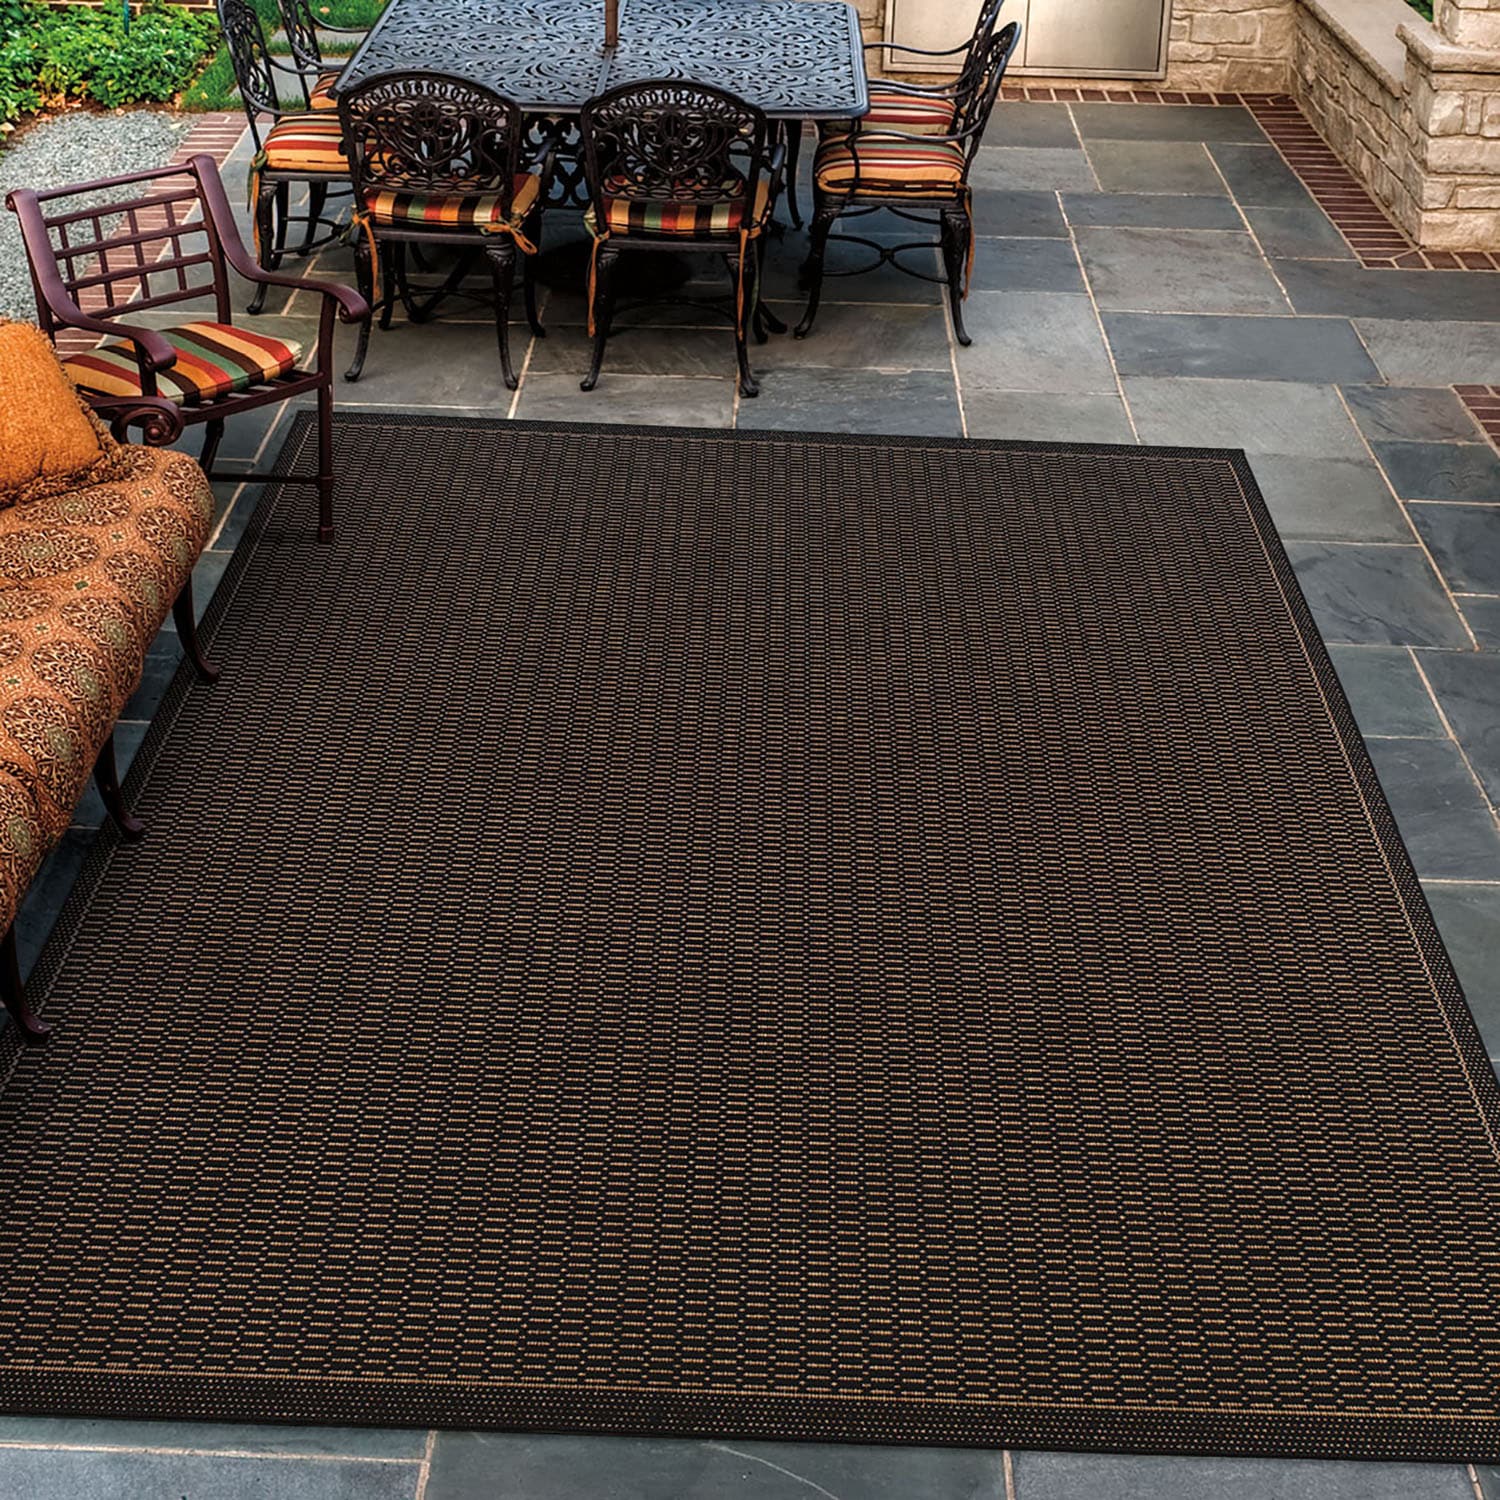 Black Outdoor Rugs, Washable Area Rugs